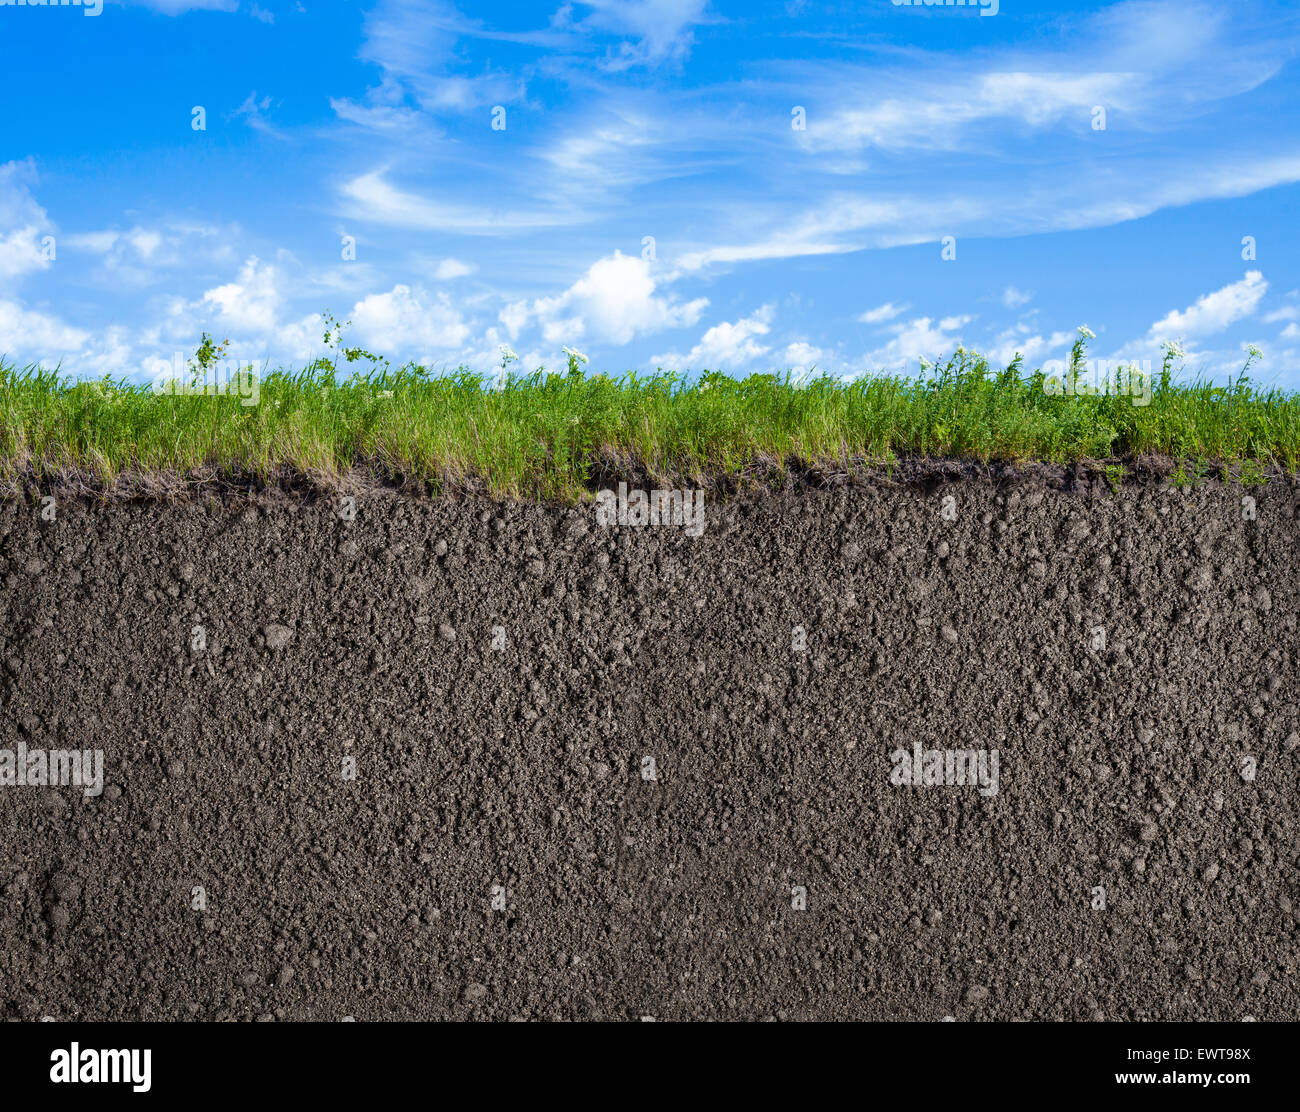 Soil, grass and sky nature background Stock Photo